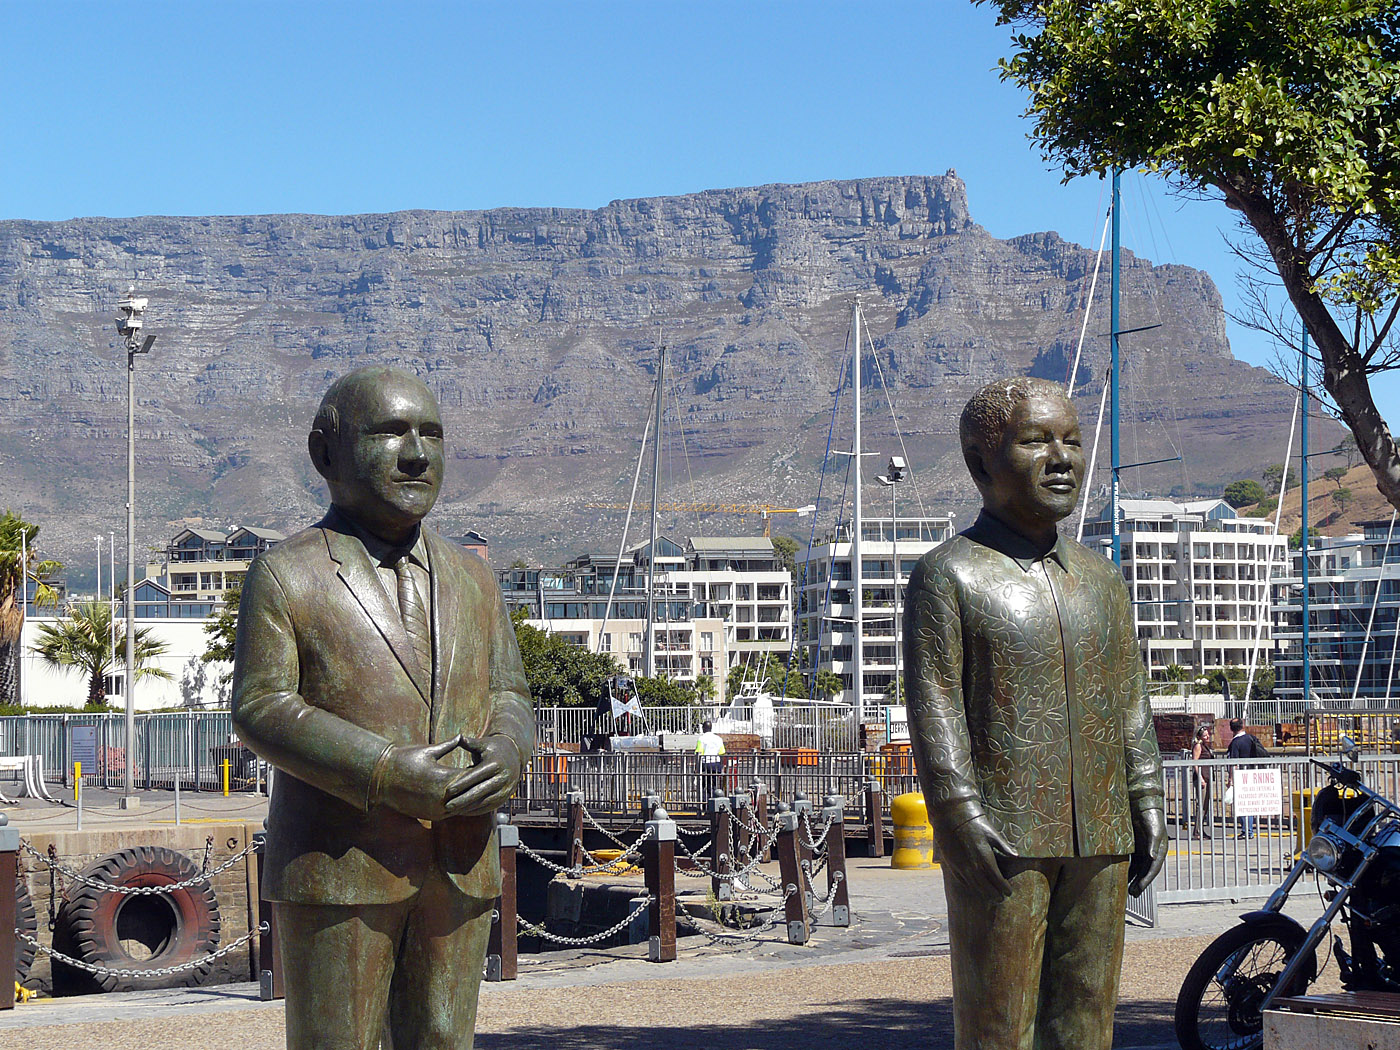 De Klerk and Mandela Statues, Victoria and Alfred Waterfront, Cape Town